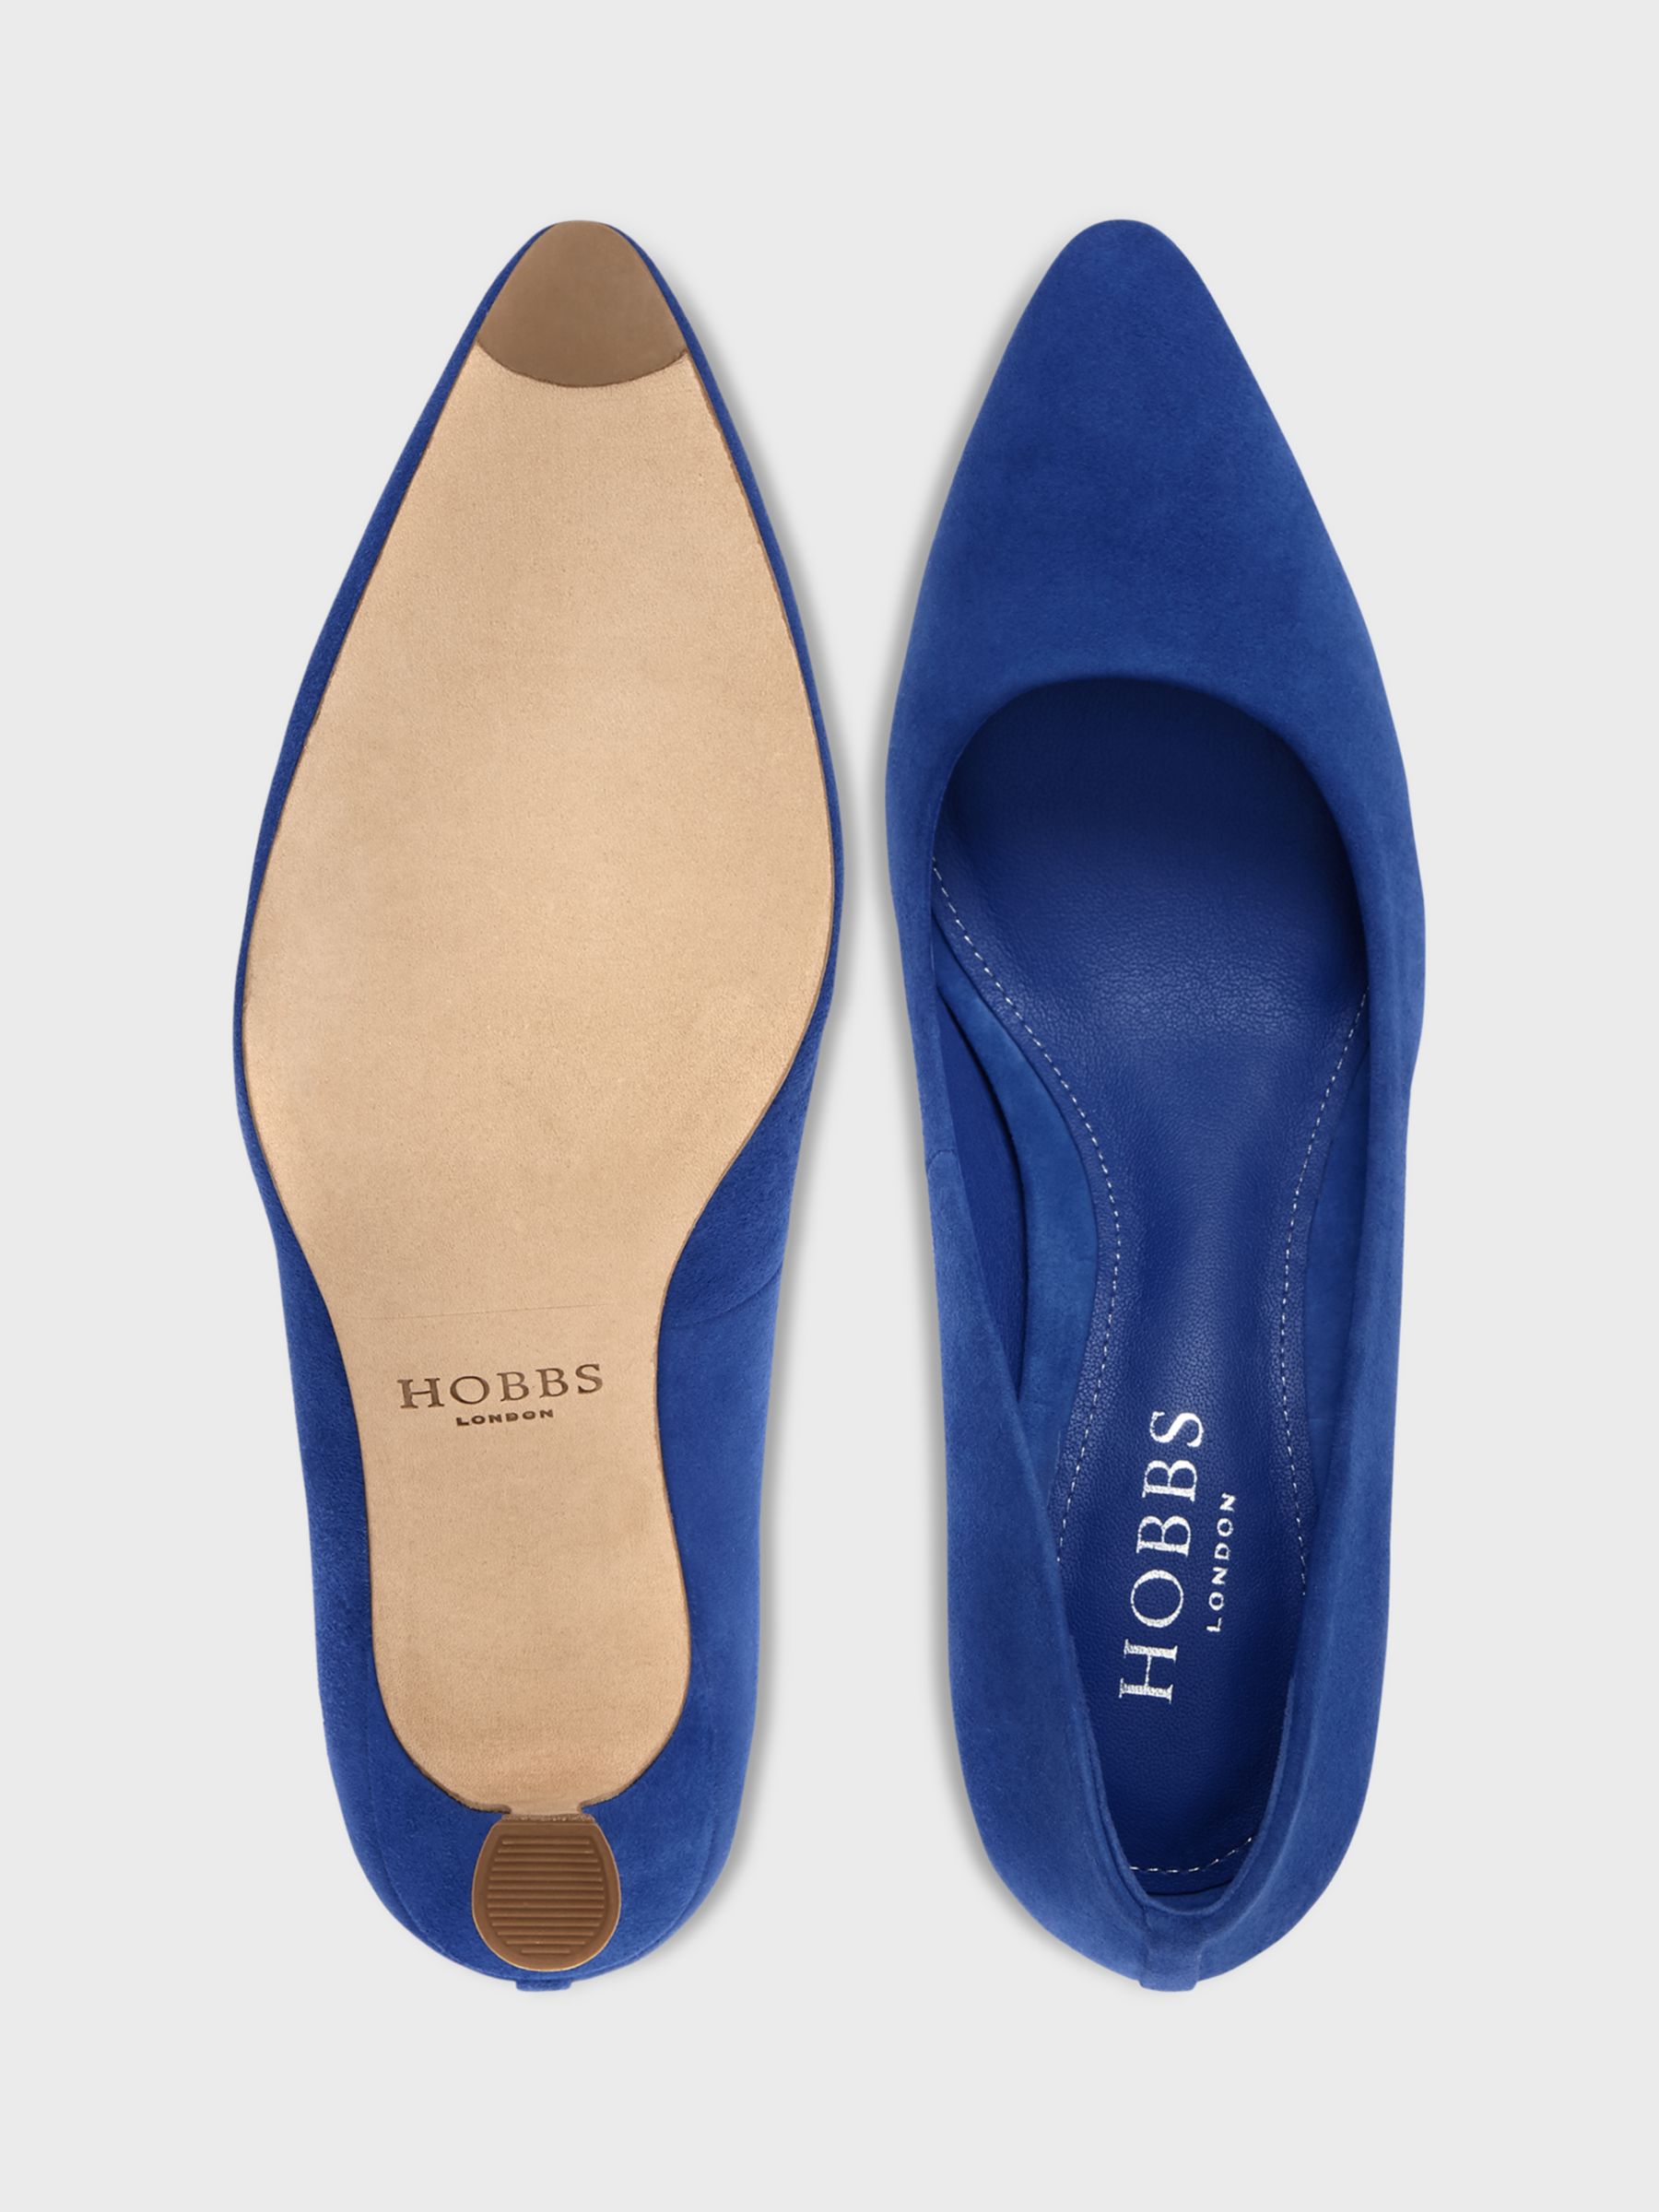 Hobbs Esther Suede Court Shoes, Cobalt at John Lewis & Partners